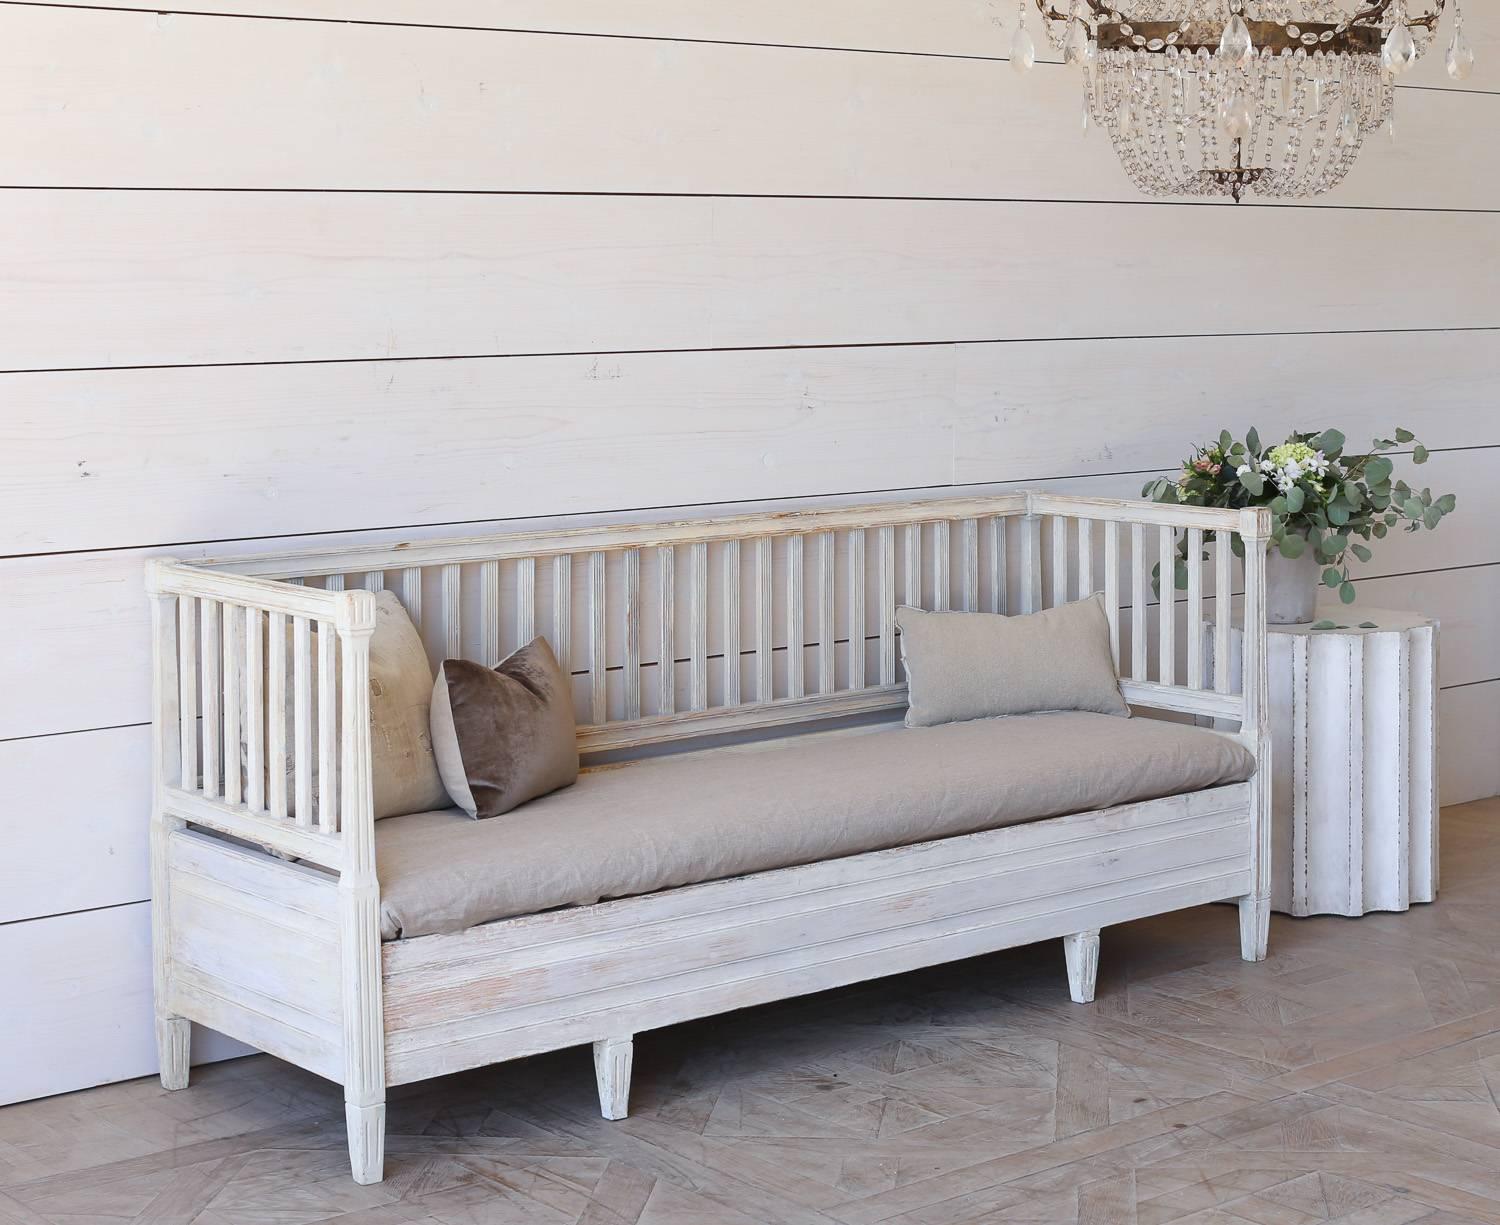 Charming antique Swedish day bed in white washed finish. Remove the mattress and raise the seat to find a small storage area. This classic country styled piece is sure to lend luxury to a sun room, porch, or entry way.